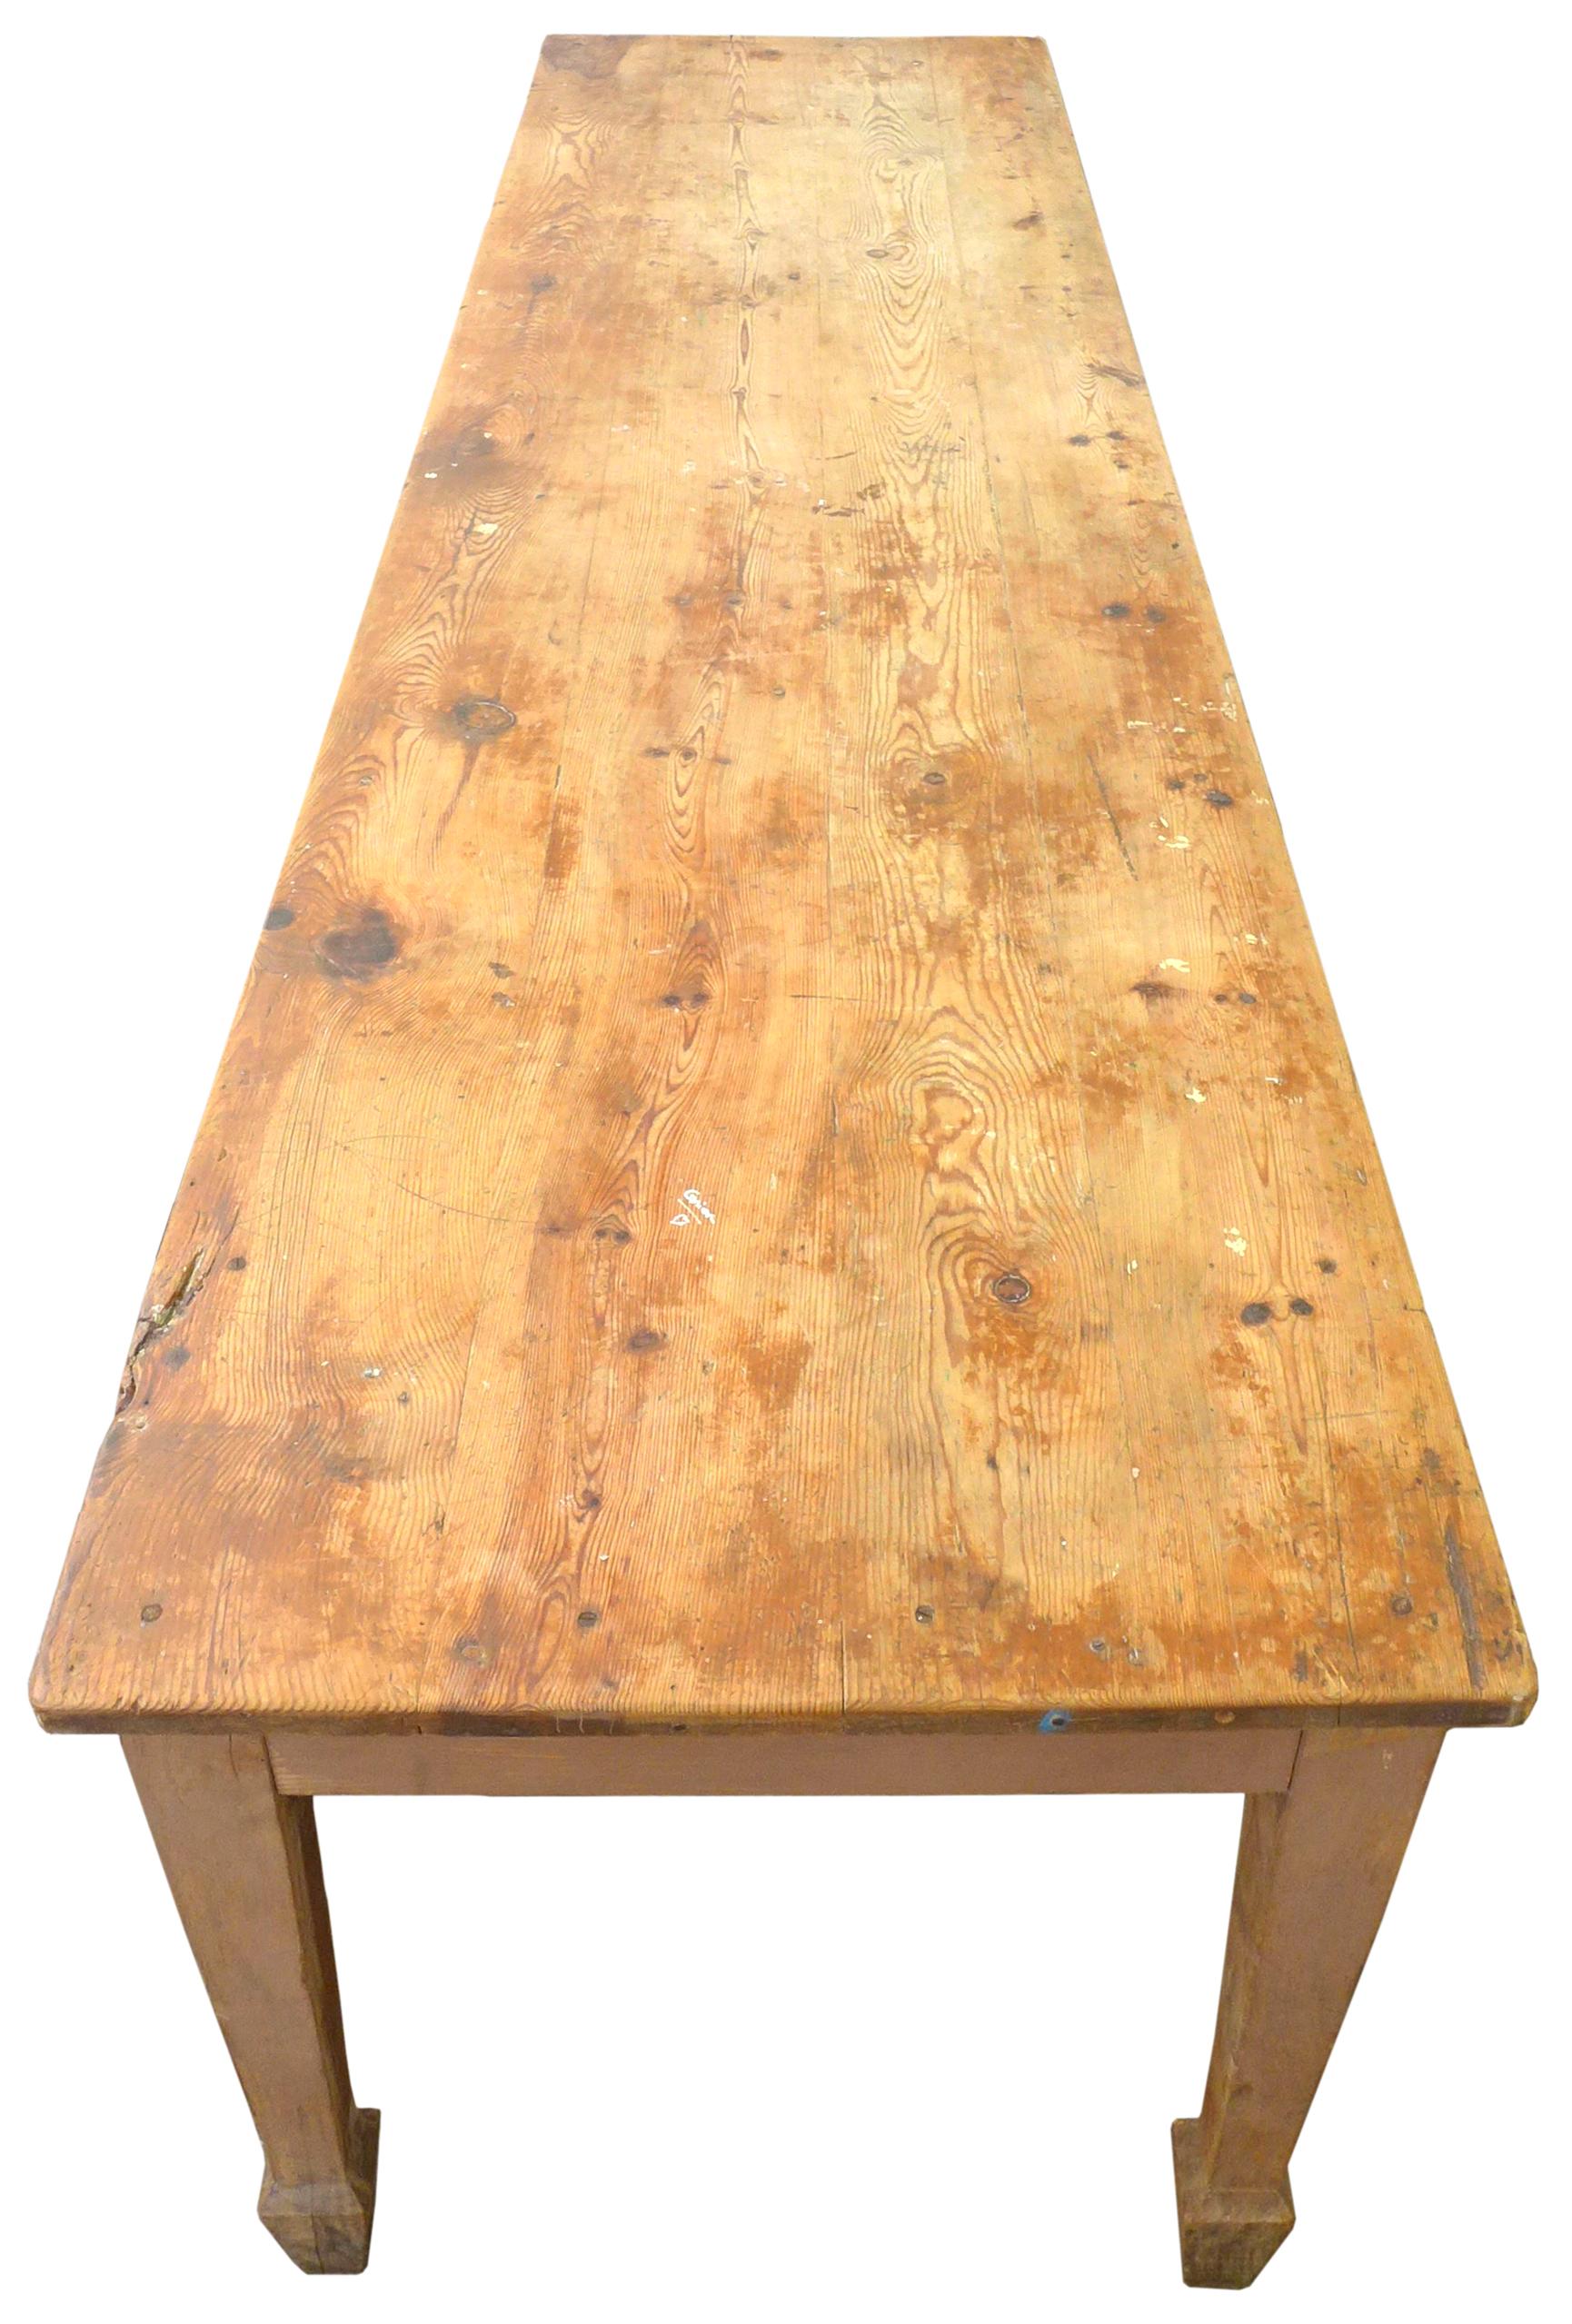 British Exceptional 19th Century English Farm Dining Table For Sale